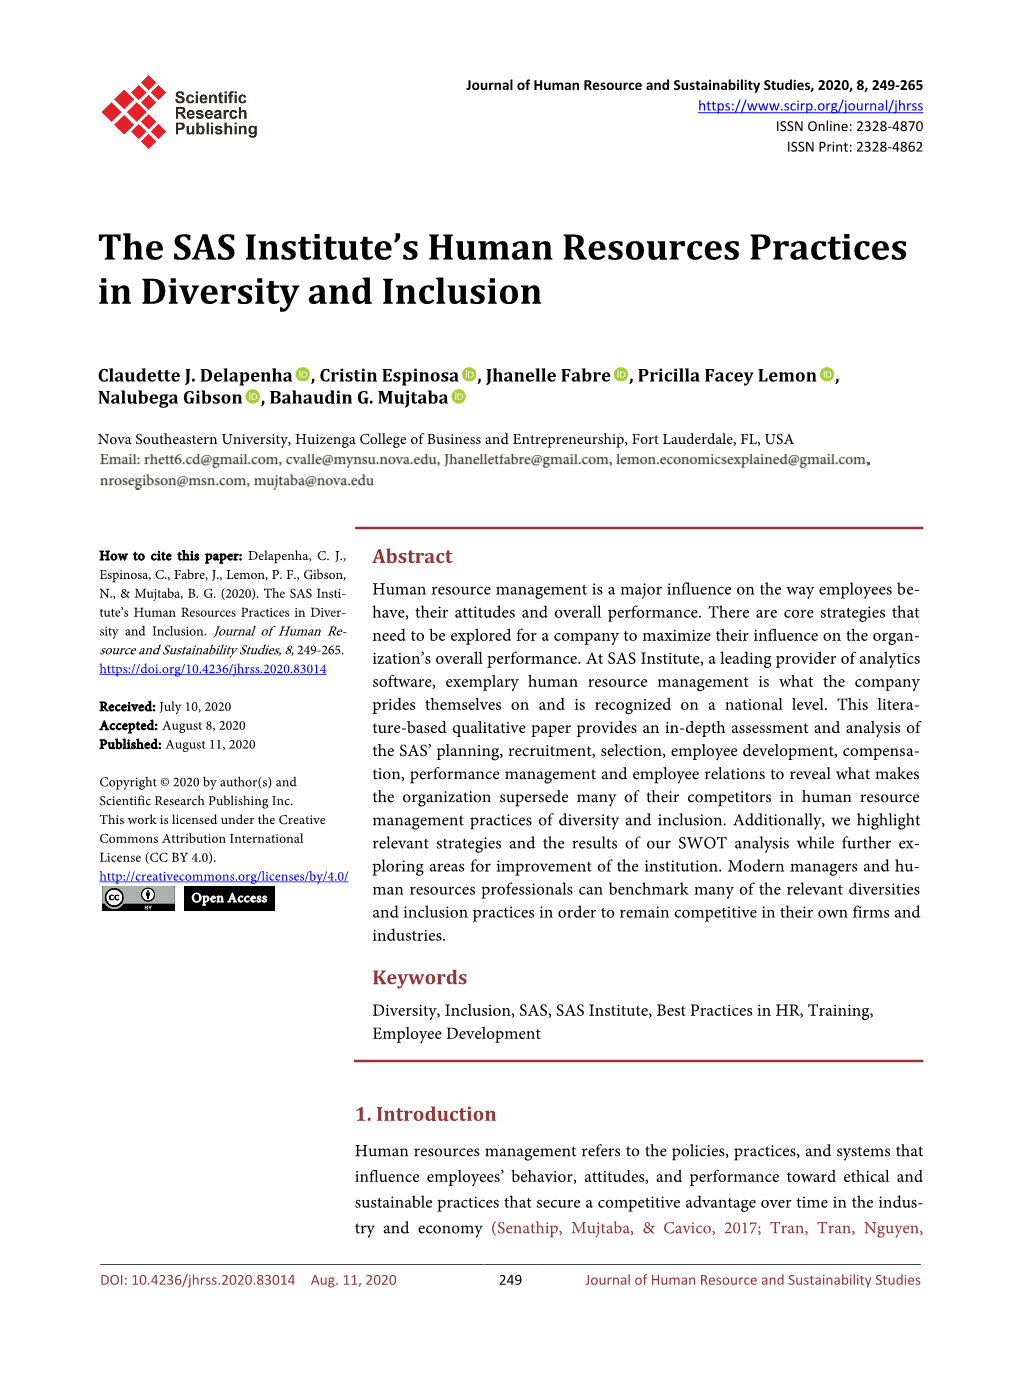 The SAS Institute's Human Resources Practices in Diversity and Inclusion